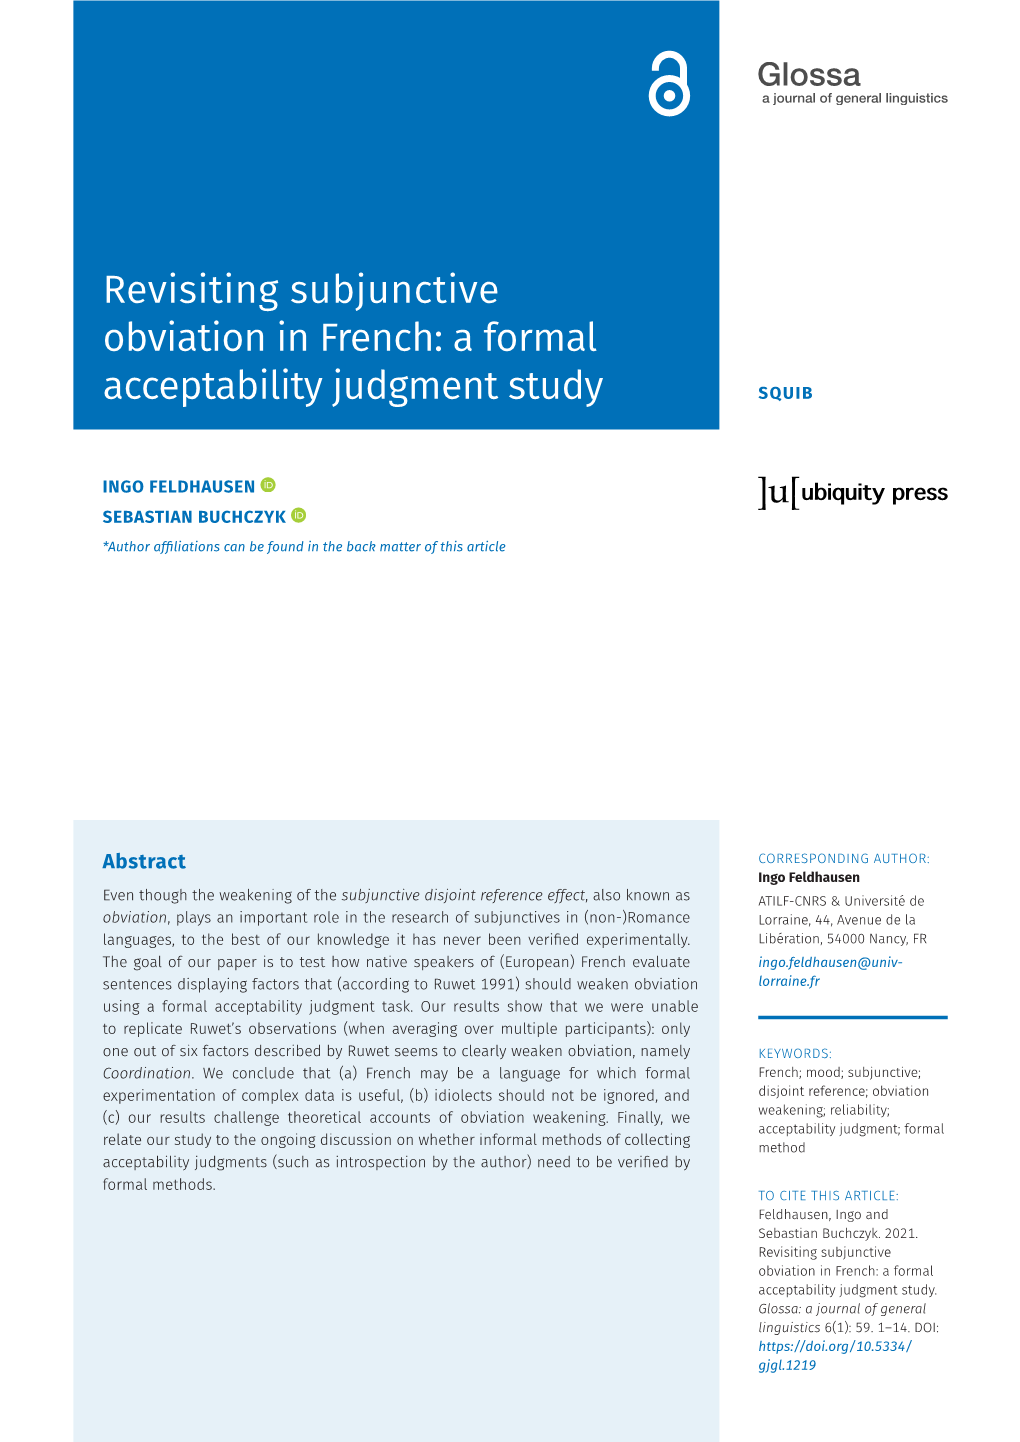 Revisiting Subjunctive Obviation in French: a Formal Acceptability Judgment Study SQUIB